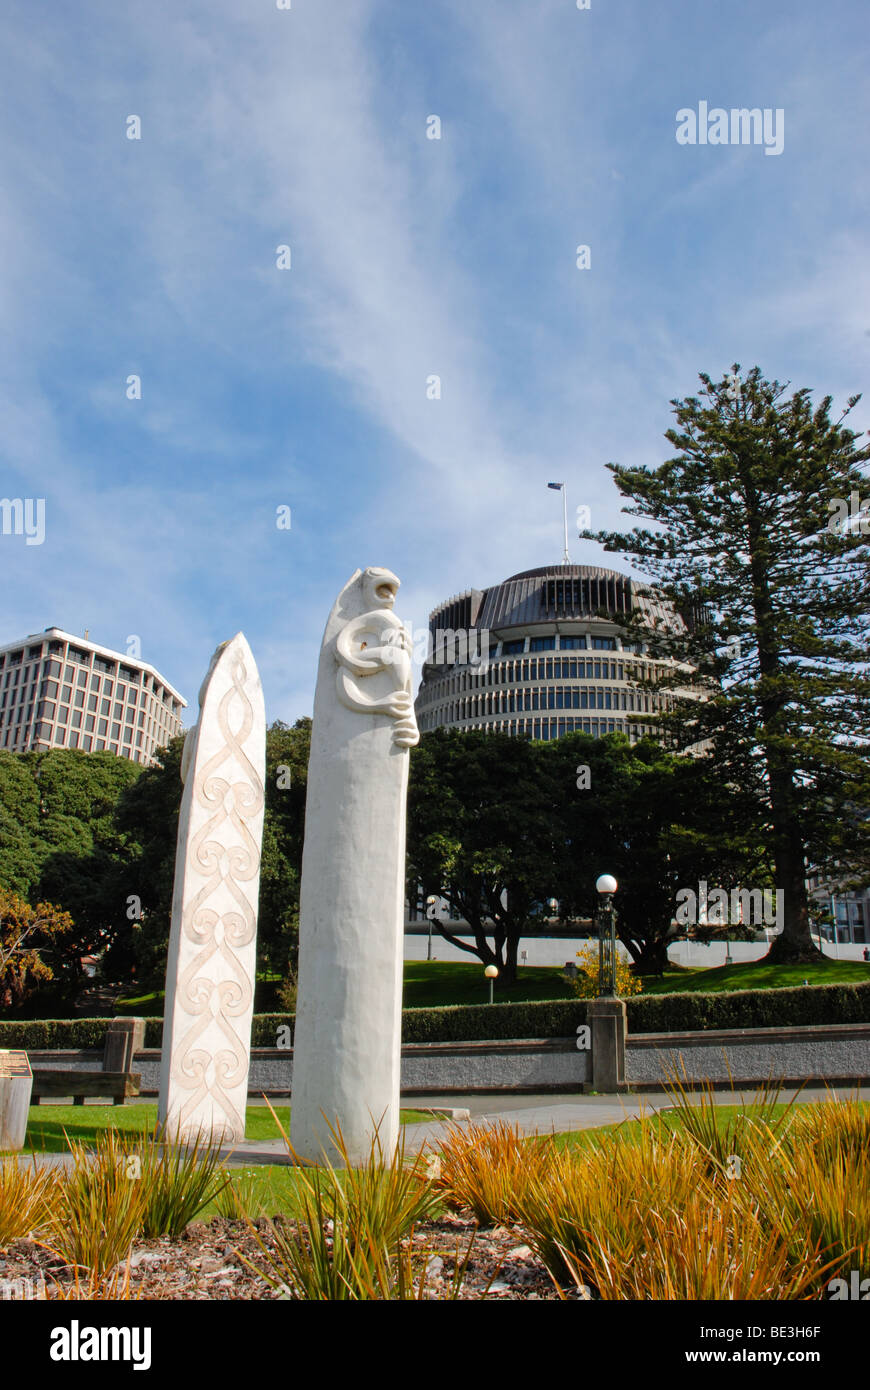 The Beehive is the home of the New Zealand Parliament, with Maori monument in foreground. Stock Photo